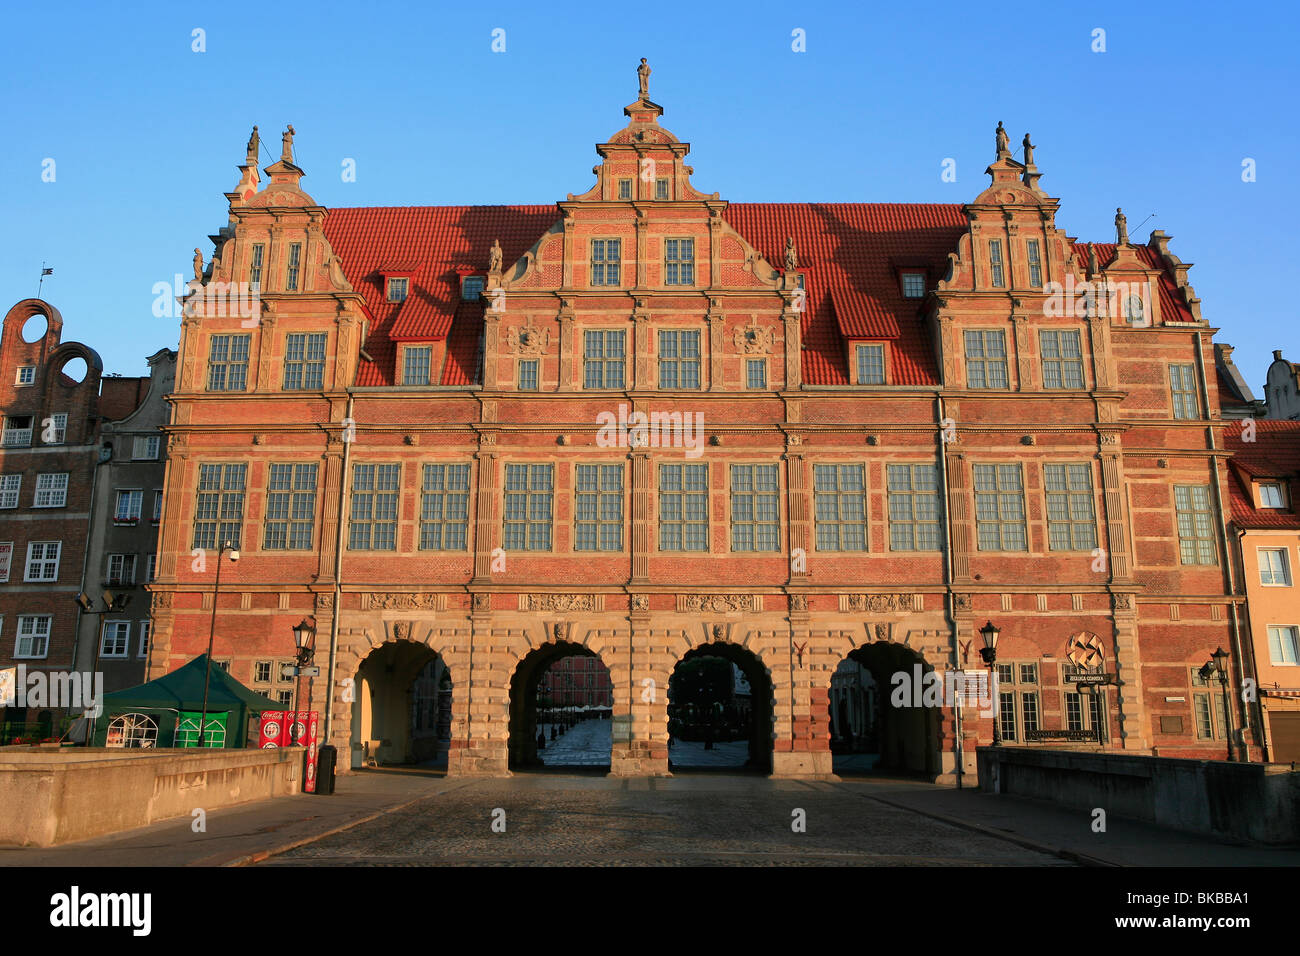 The Green Gate (former residence of the Polish kings) in 16th century mannerist style at Gdansk, Poland Stock Photo